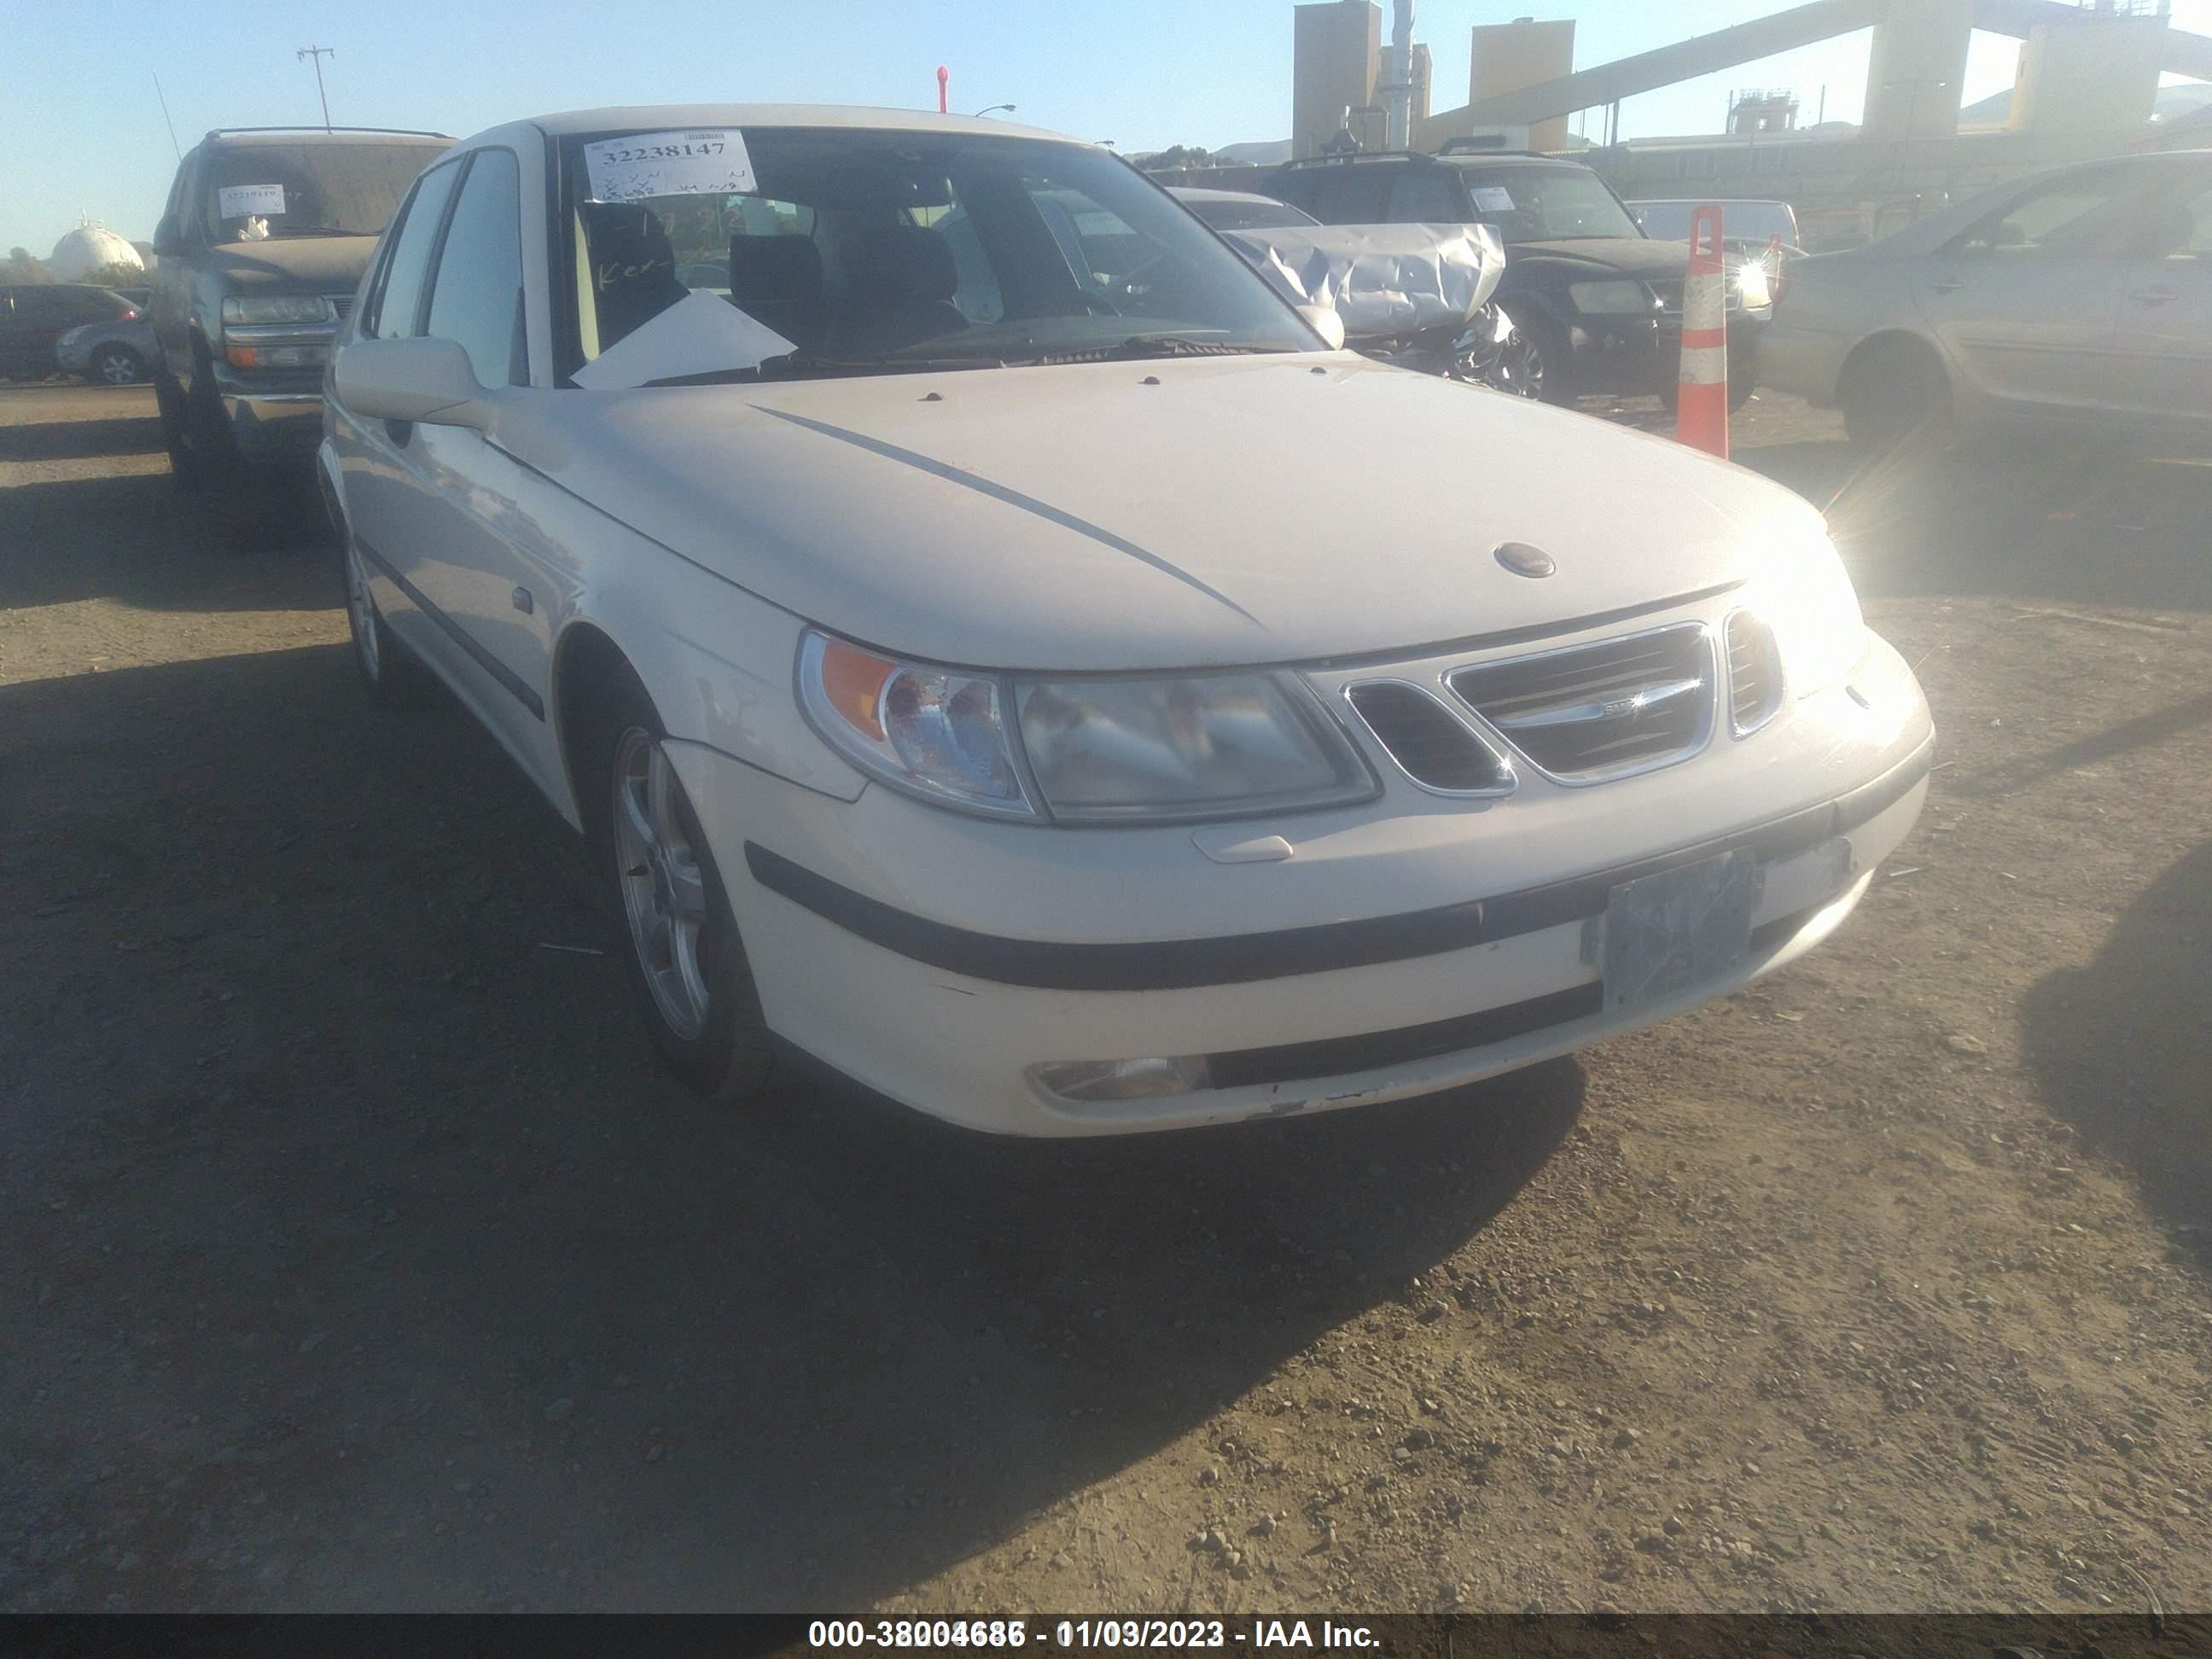 vin: YS3ED49Z333009192 YS3ED49Z333009192 2003 saab 9-5 3000 for Sale in 94565, 2780 Willow Pass Road, Bay Point, California, USA